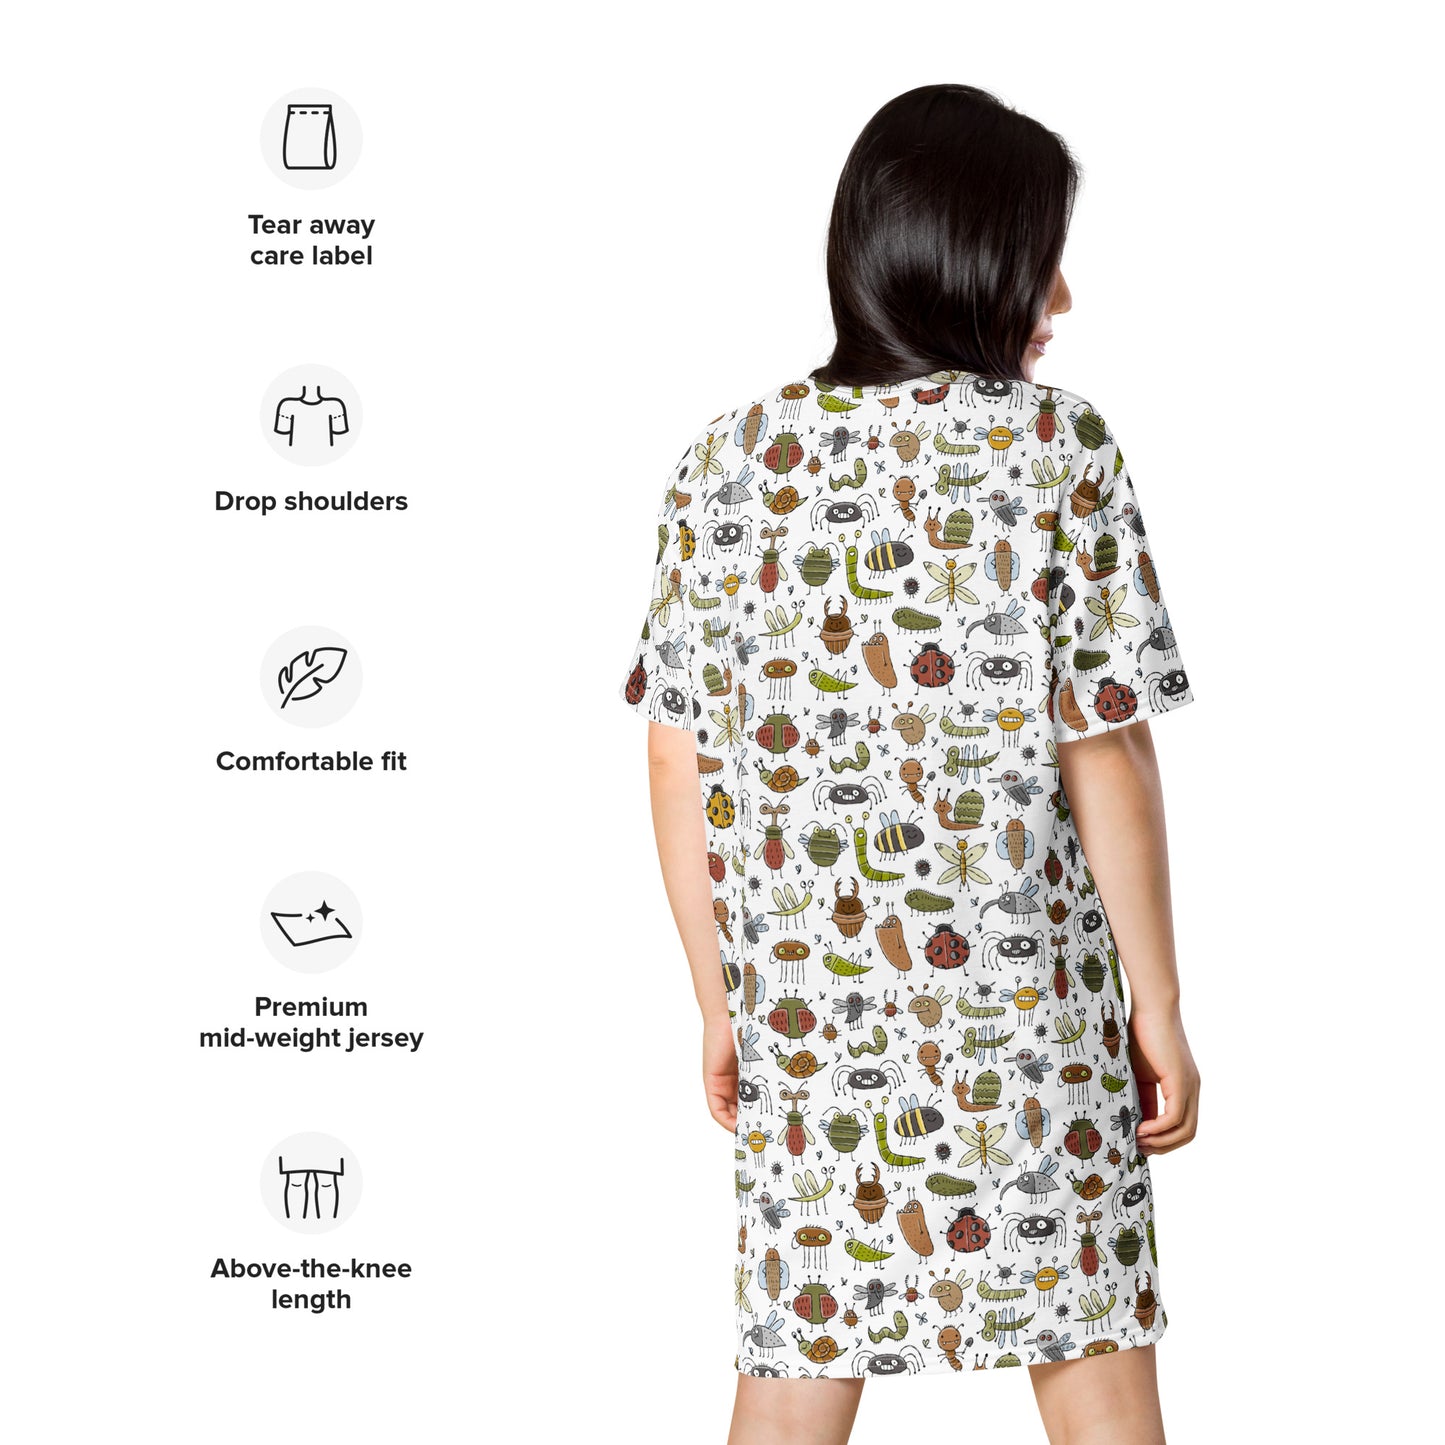 Female dress with funny insects designer print. Personalised text - Entomologist